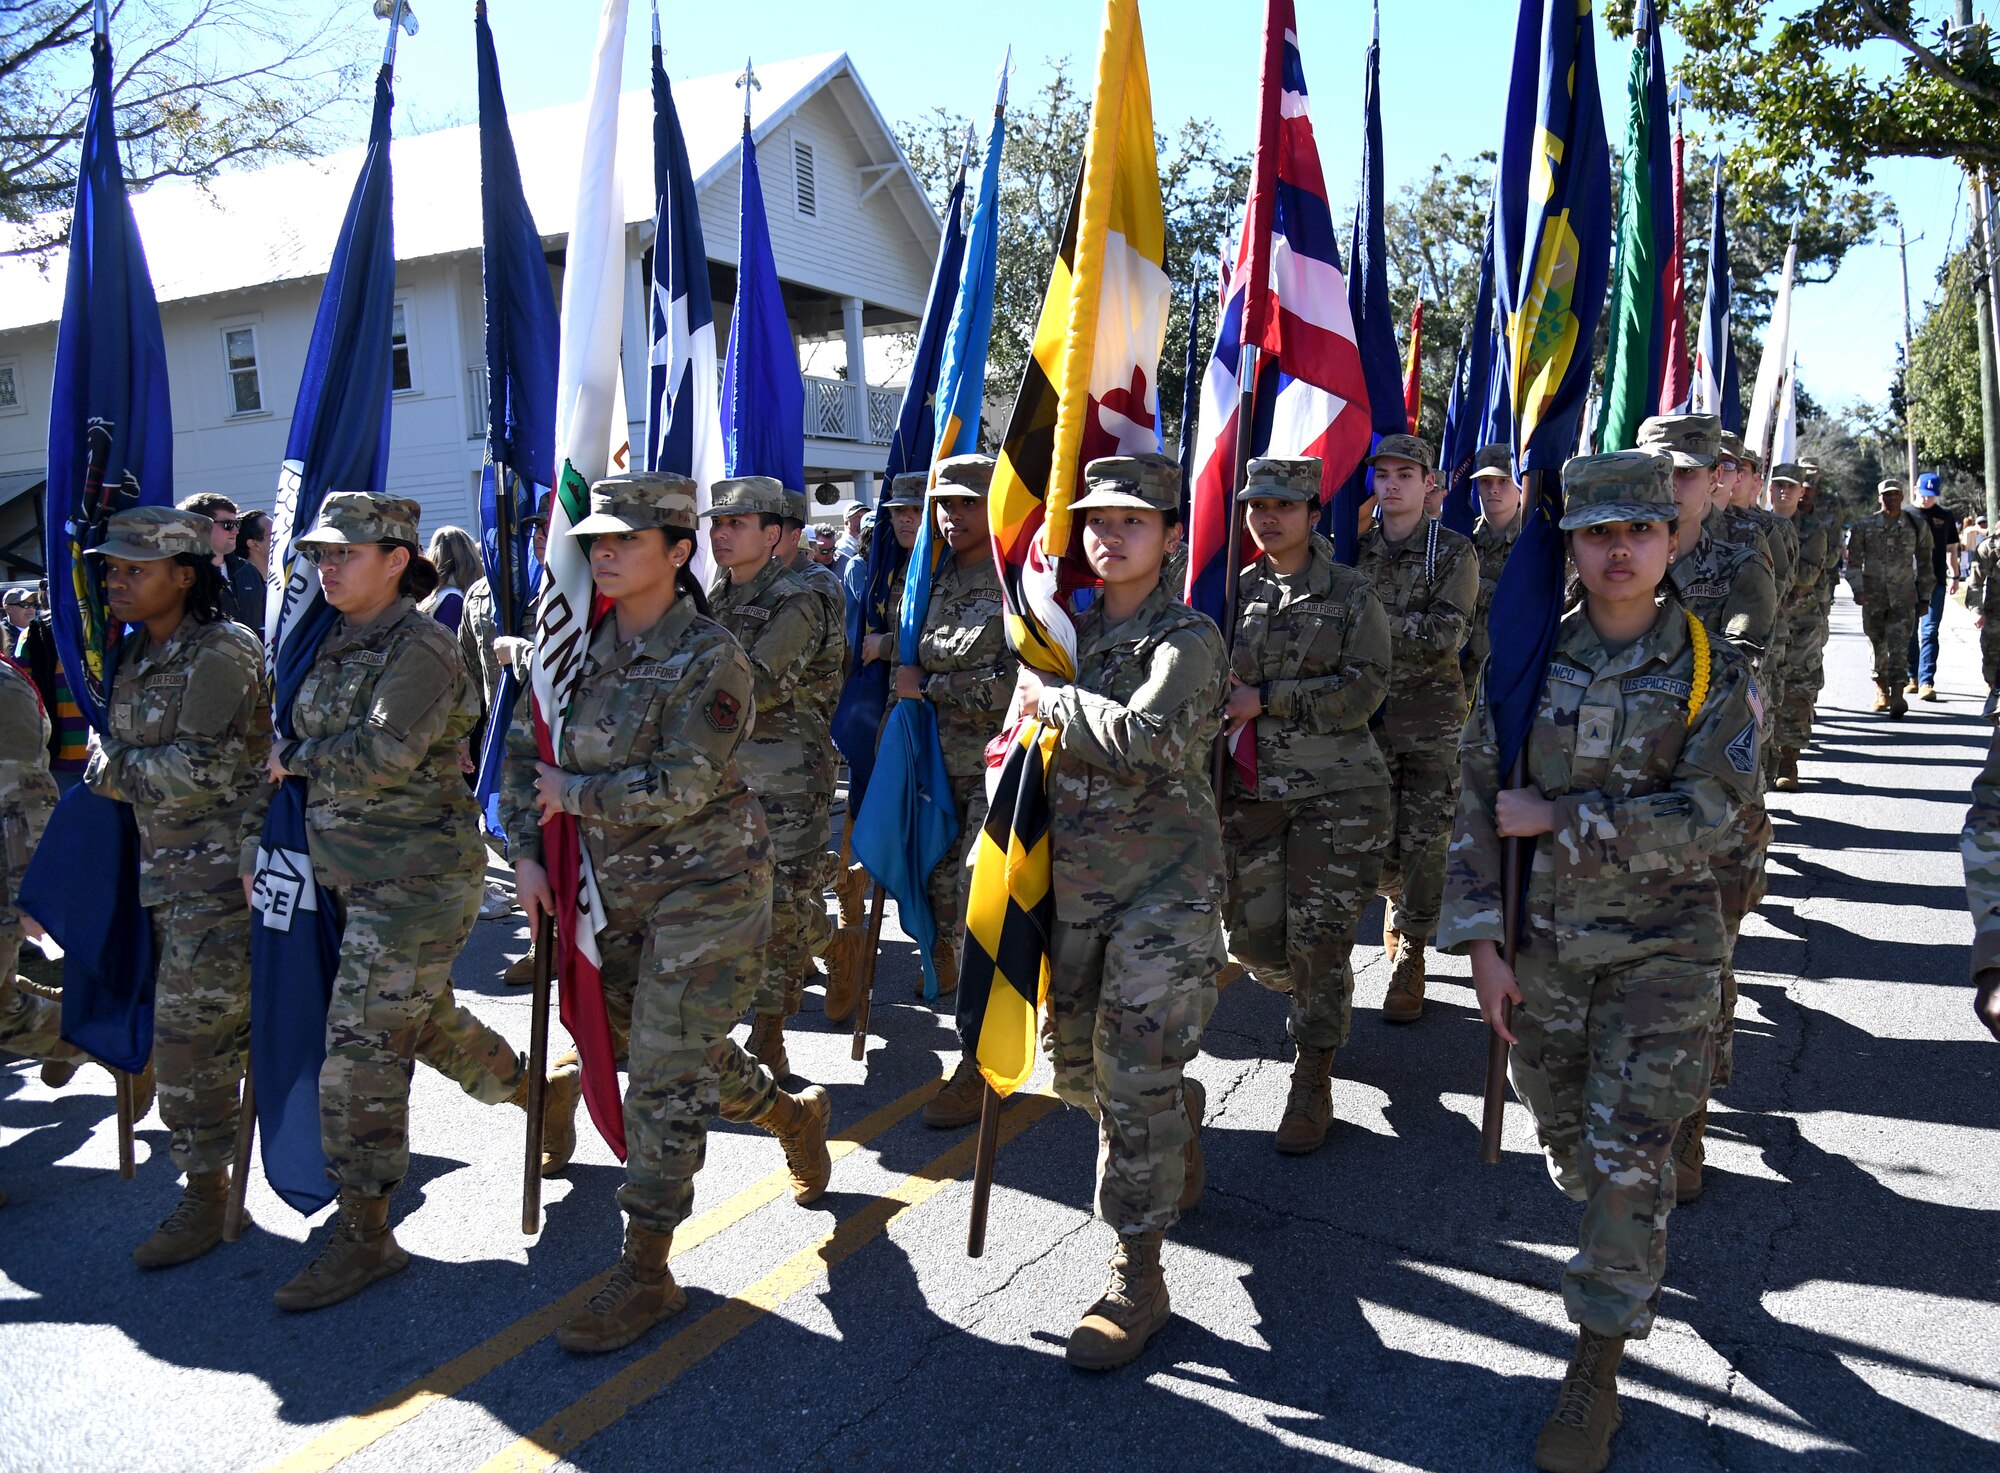 Keesler Air Force Base Airmen carry the 50 state flags during the Ocean Springs Elks Mardi Gras Parade at Ocean Springs, Mississippi, Feb. 4, 2023.